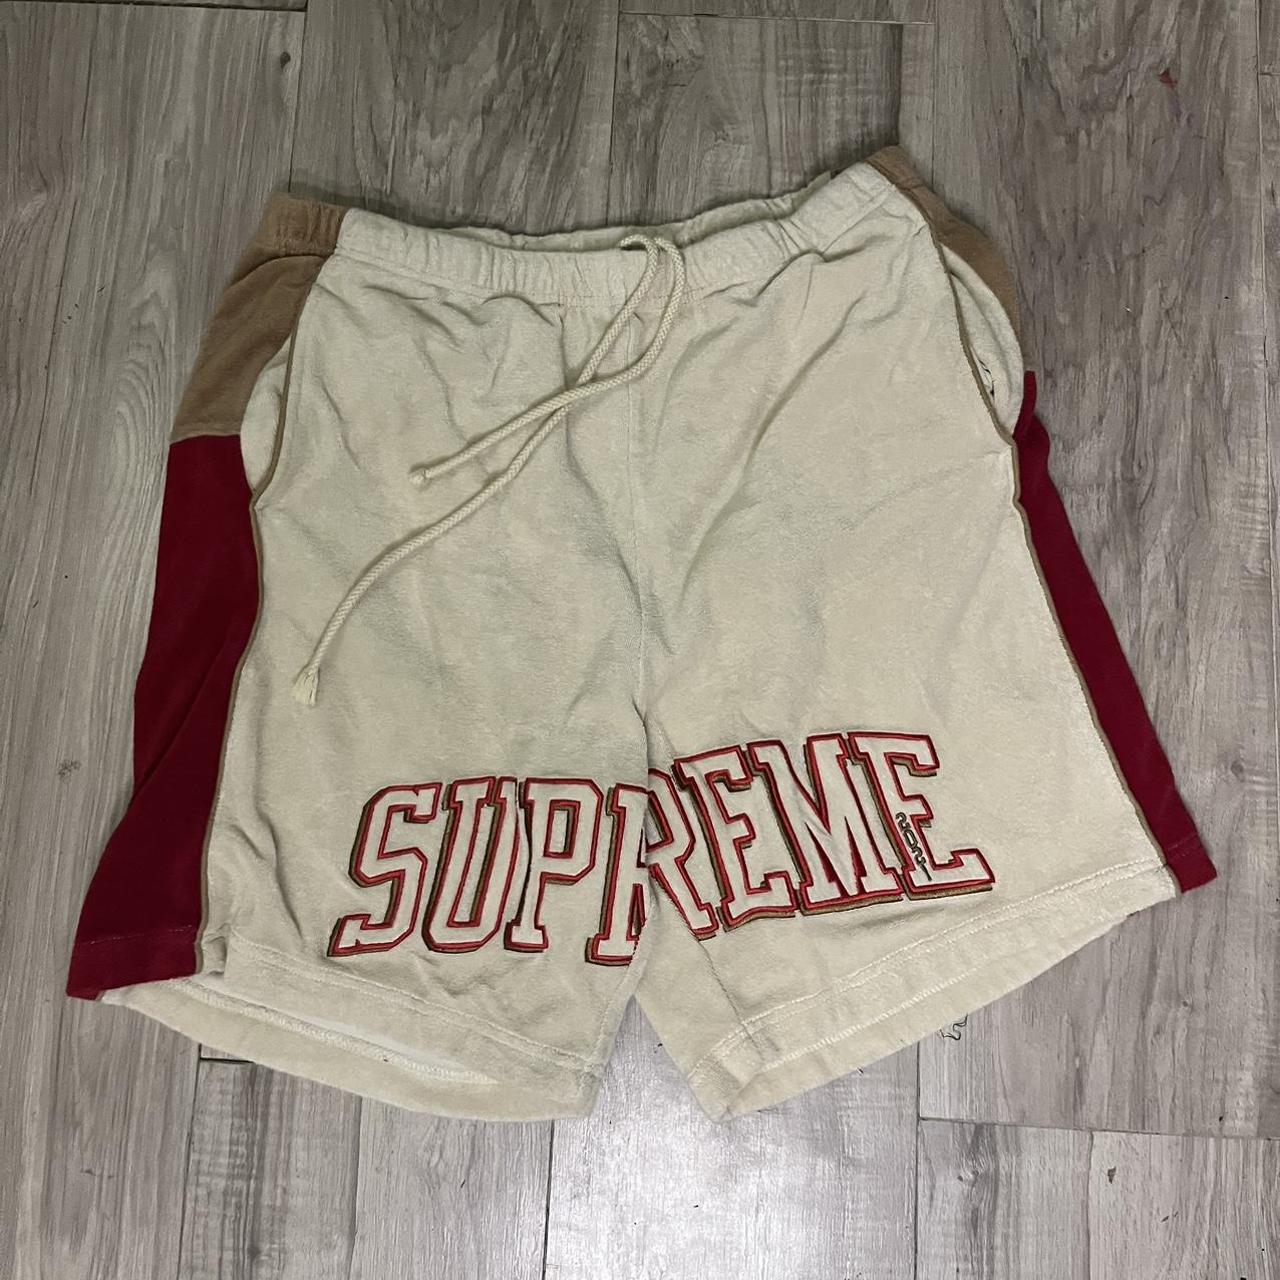 Supreme Terry cloth shorts. priced at $186 on stock...